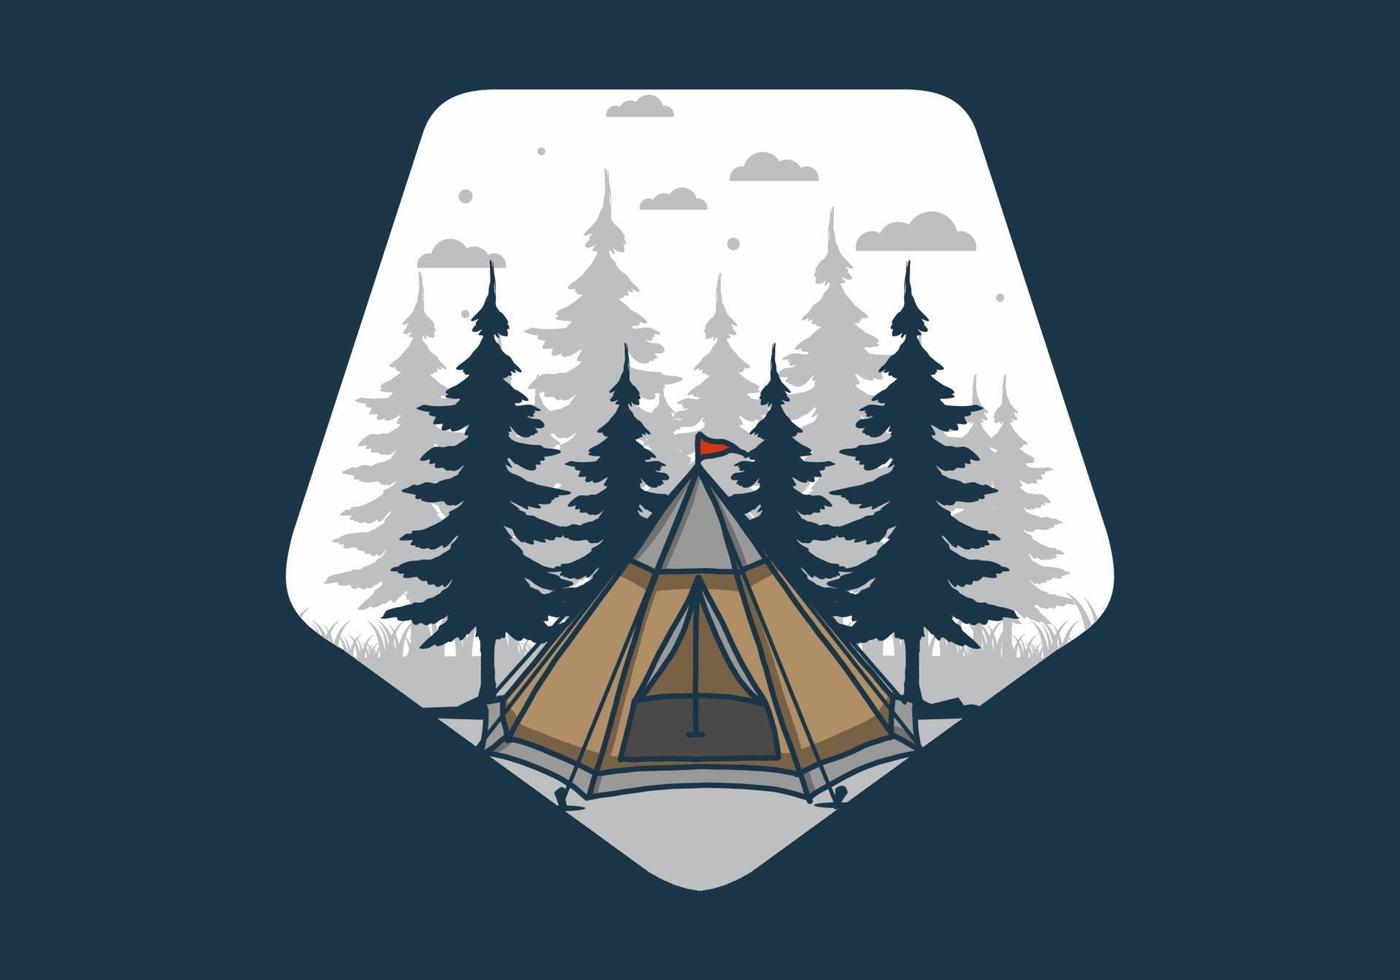 Cone tent and pine trees illustration vector